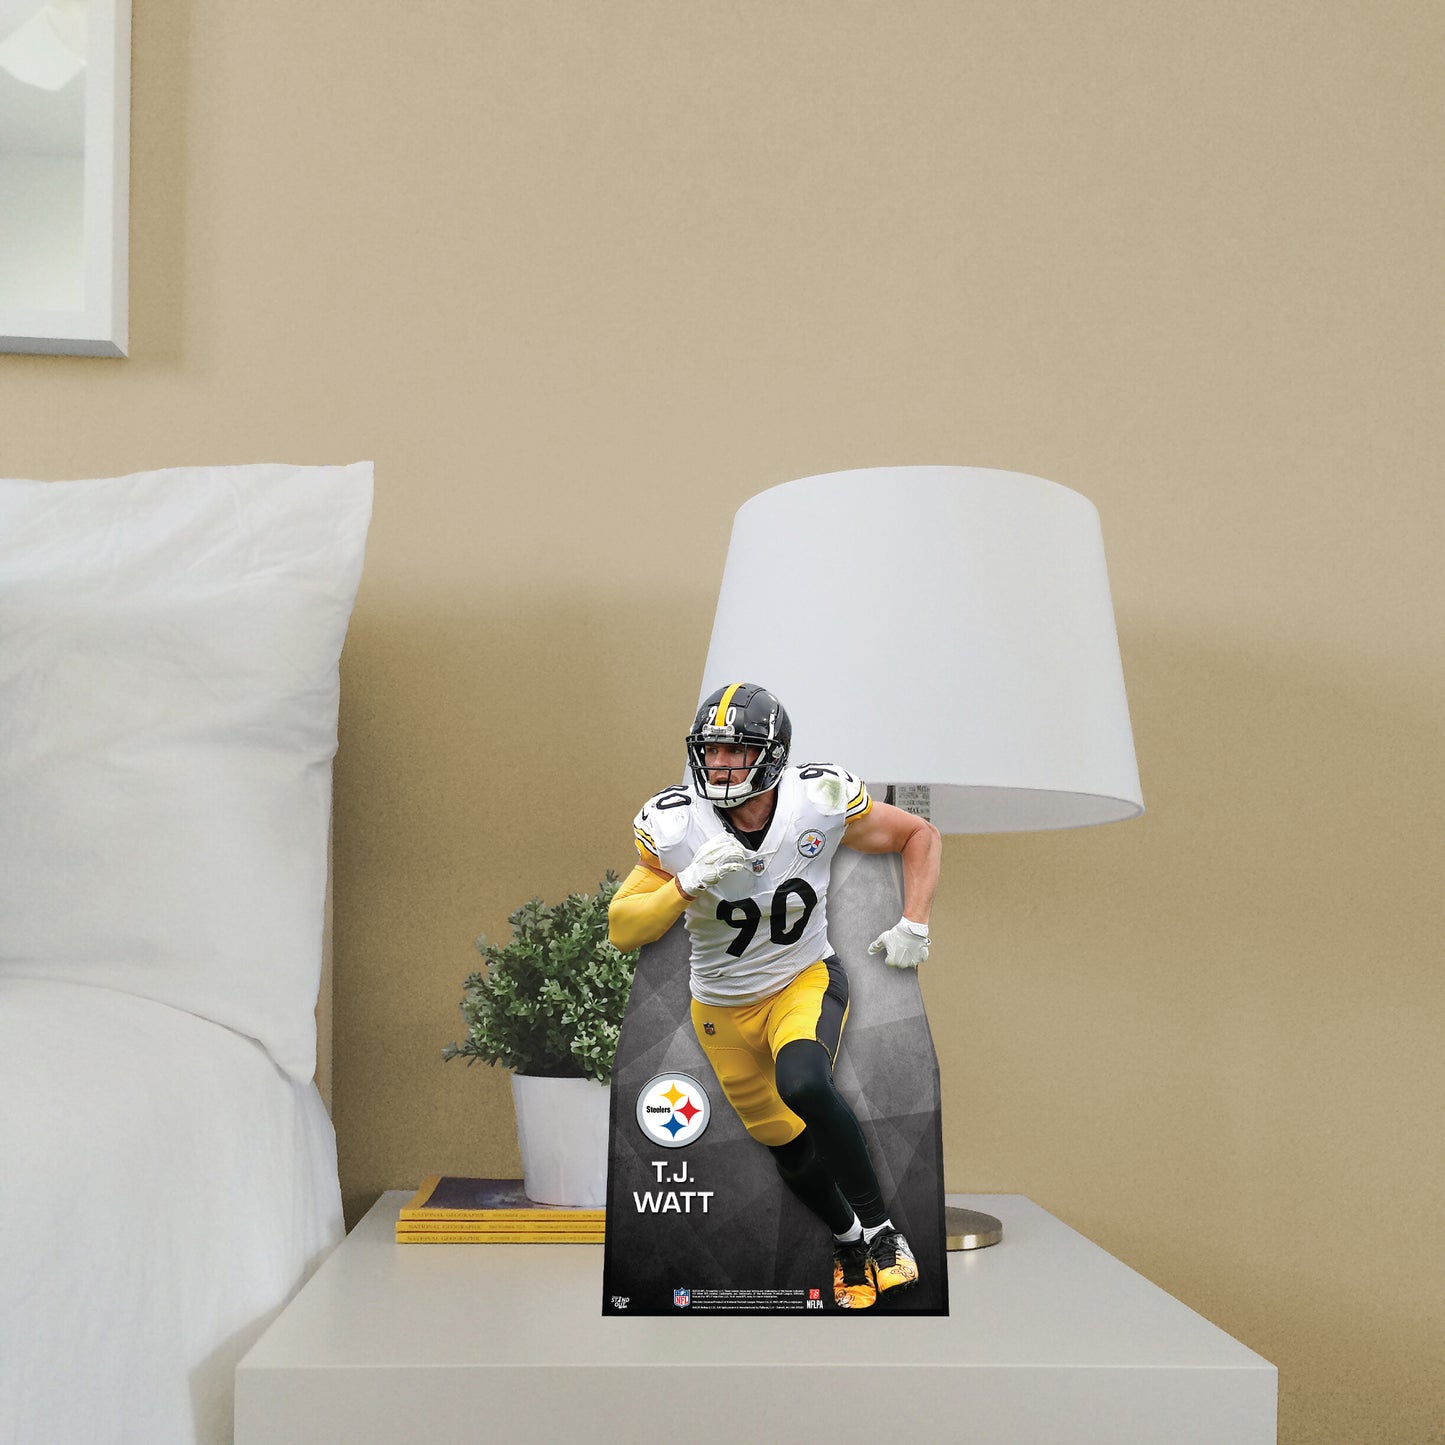 Pittsburgh Steelers: T.J. Watt 2021   Cardstock Cutout  - Officially Licensed NFL    Stand Out